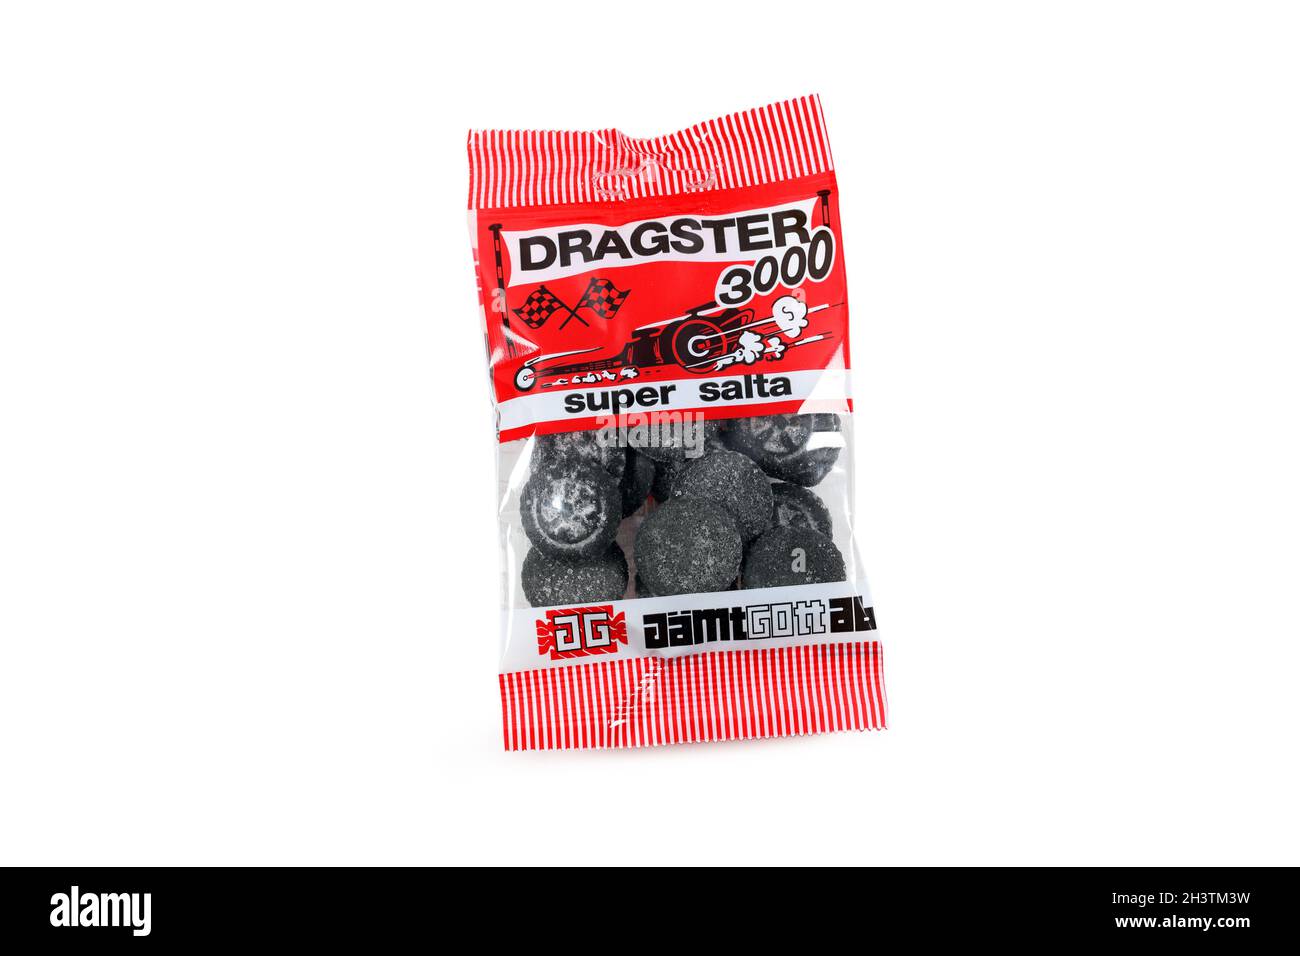 A bag of Jämtgott brand Dragster 3000 Swedish salty licorice candy isolated on a white background. licorice coated with ammonium chloride. Stock Photo